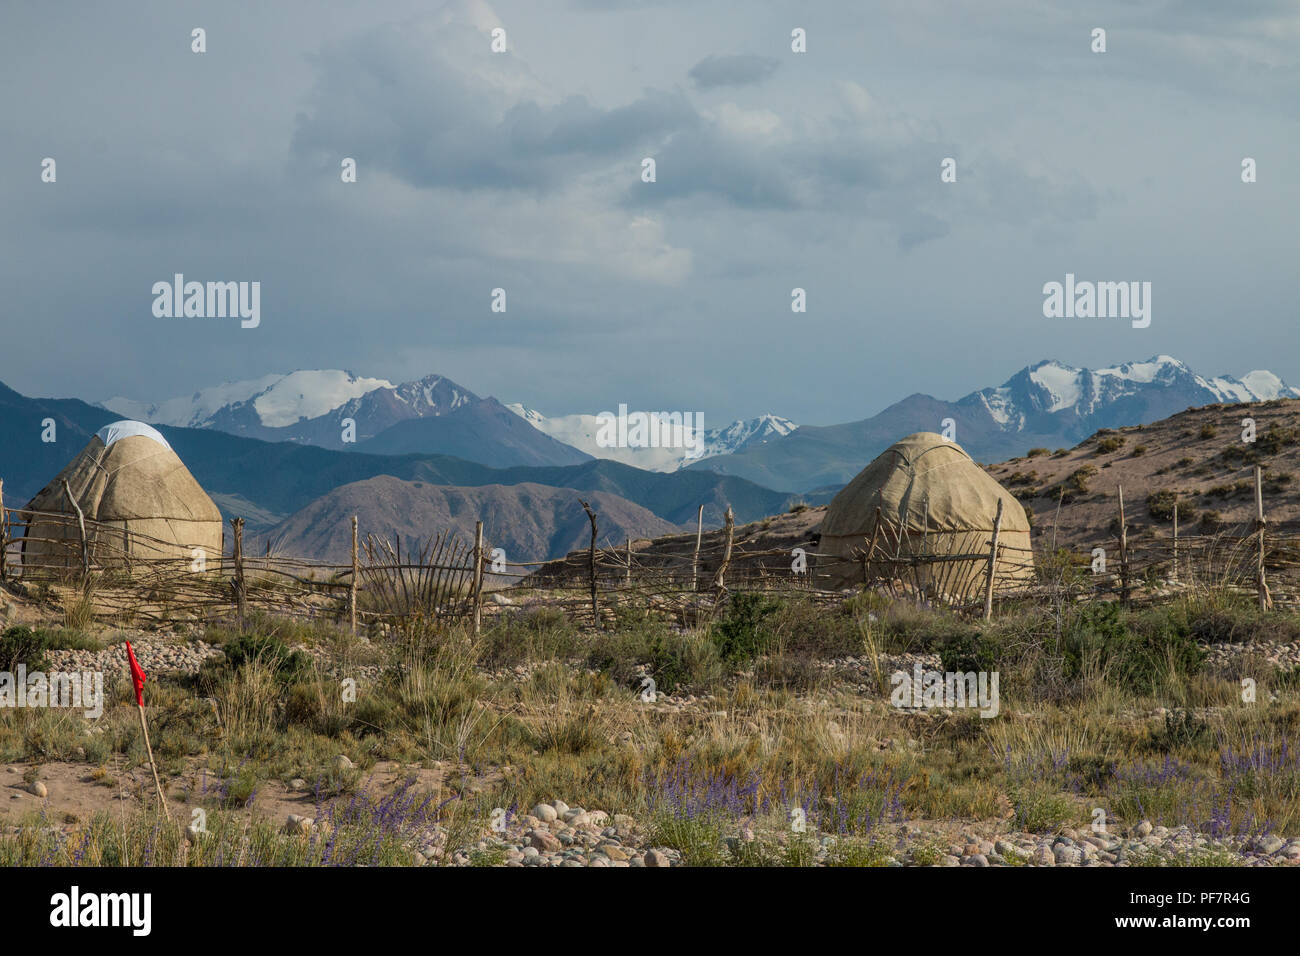 Traditional Kyrgyz yurts with snow capped mountains in the background. Near Bokonbayevo, Kyrgyzstan. Stock Photo